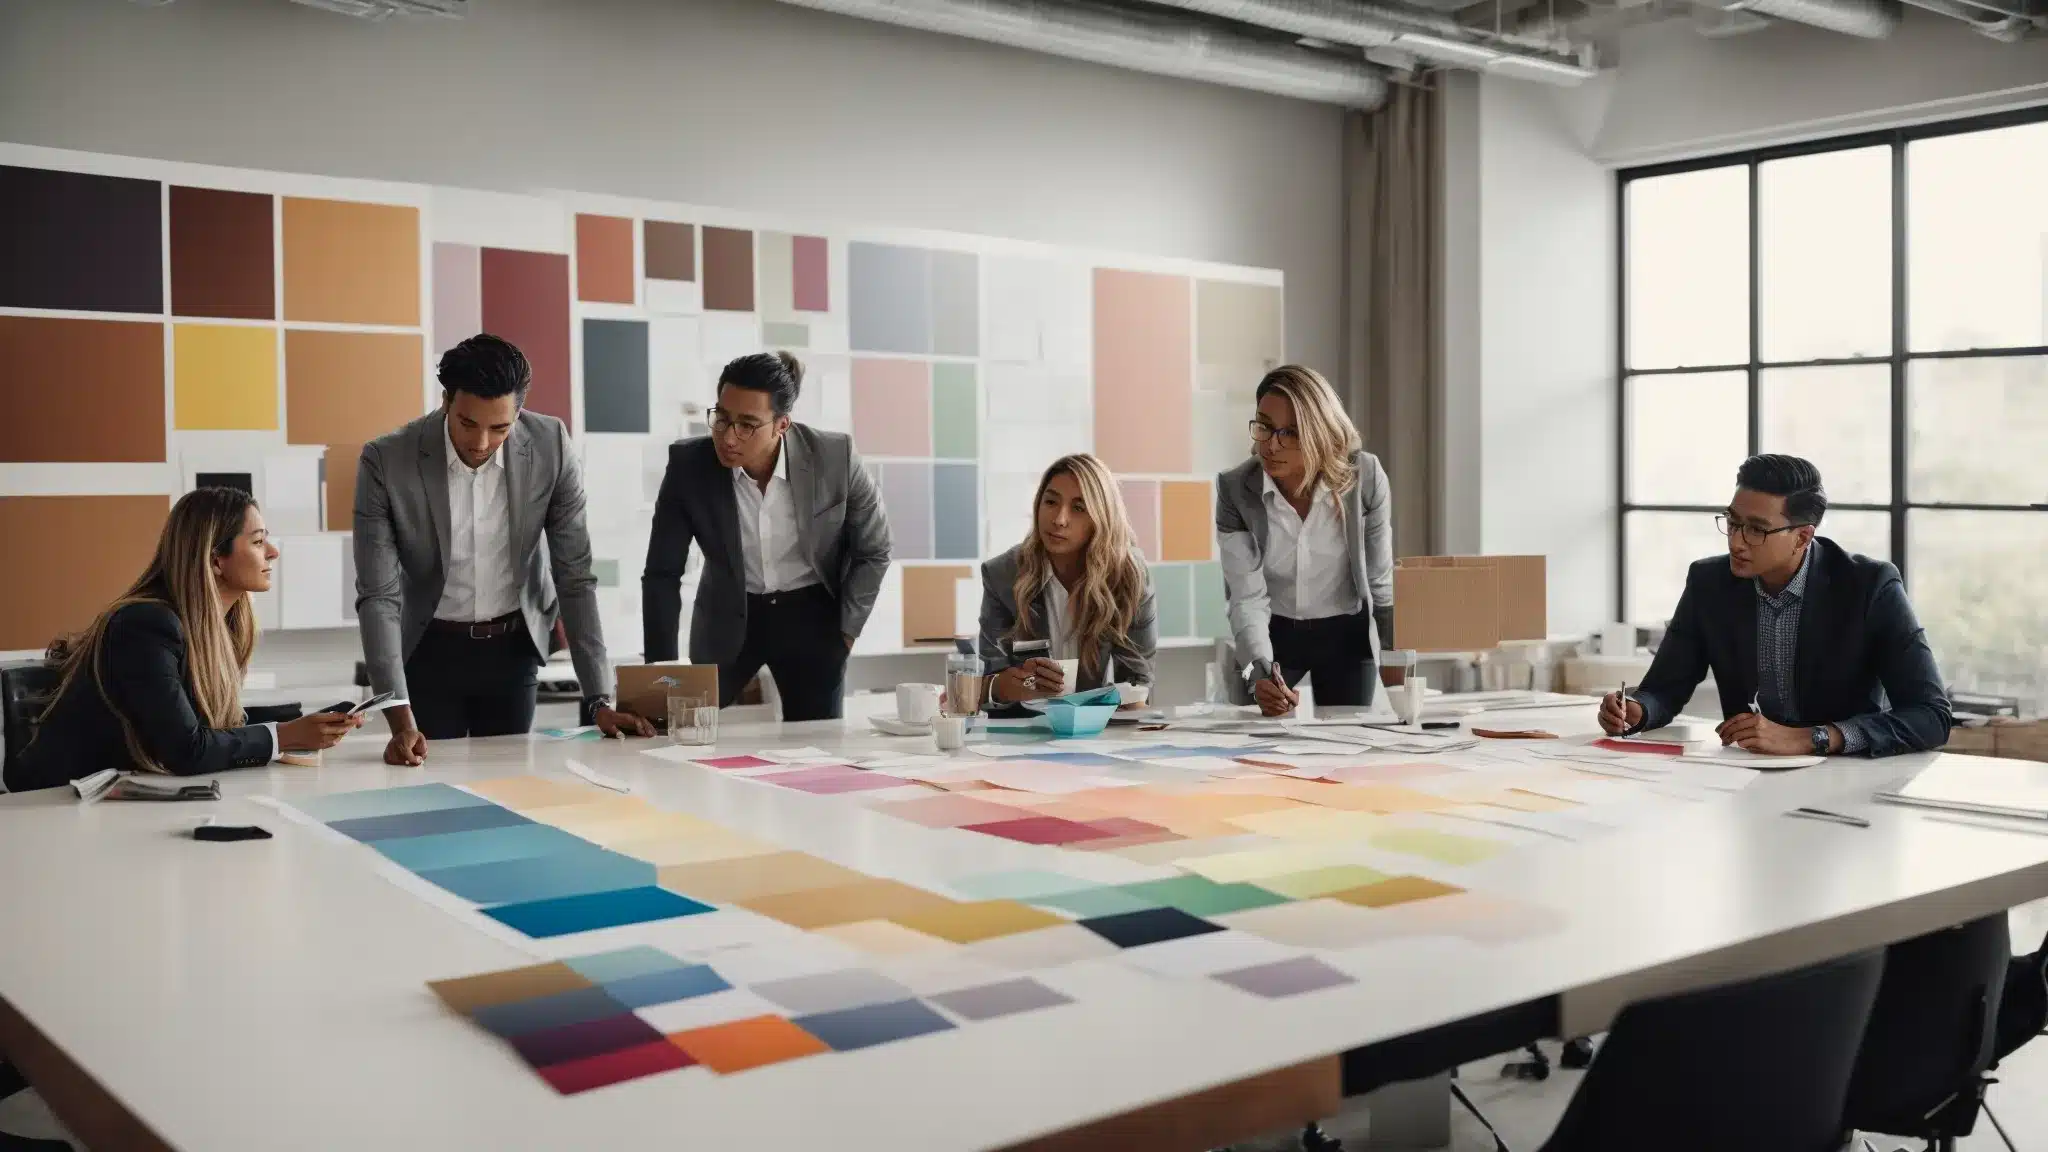 A Marketing Team Gathers Around A Conference Table, Brainstorming Over A Large Blank Canvas With Color Swatches And Product Prototypes Strewn About.